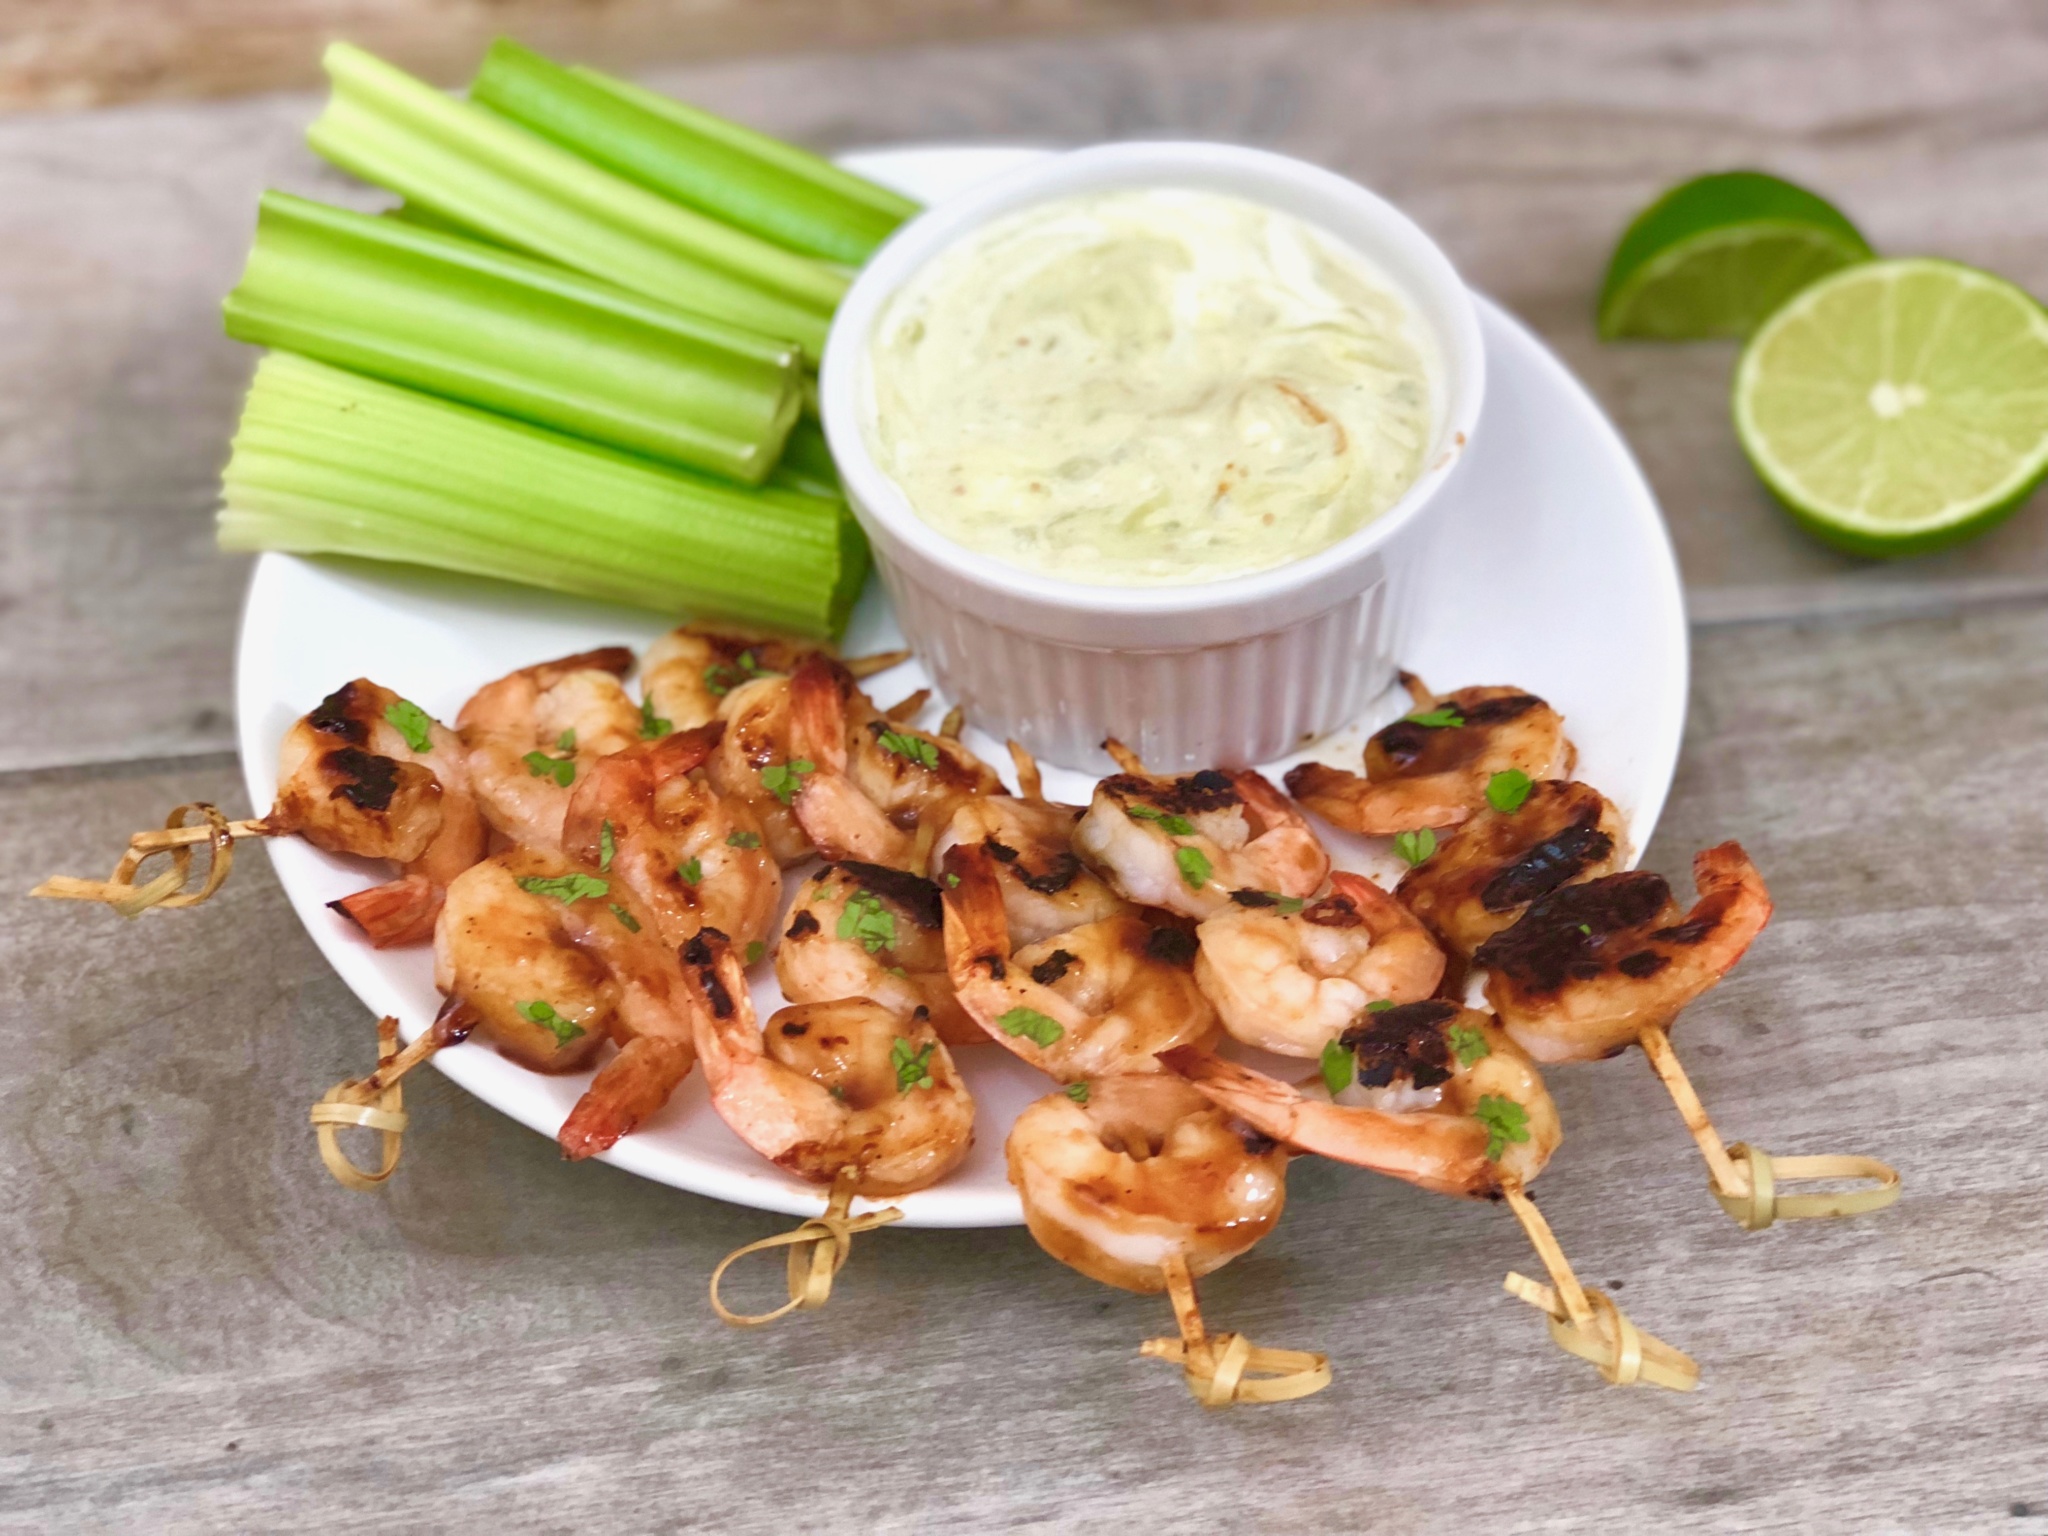 Chipotle Barbecue Shrimp Skewers with Blue Cheese Avocado Sauce